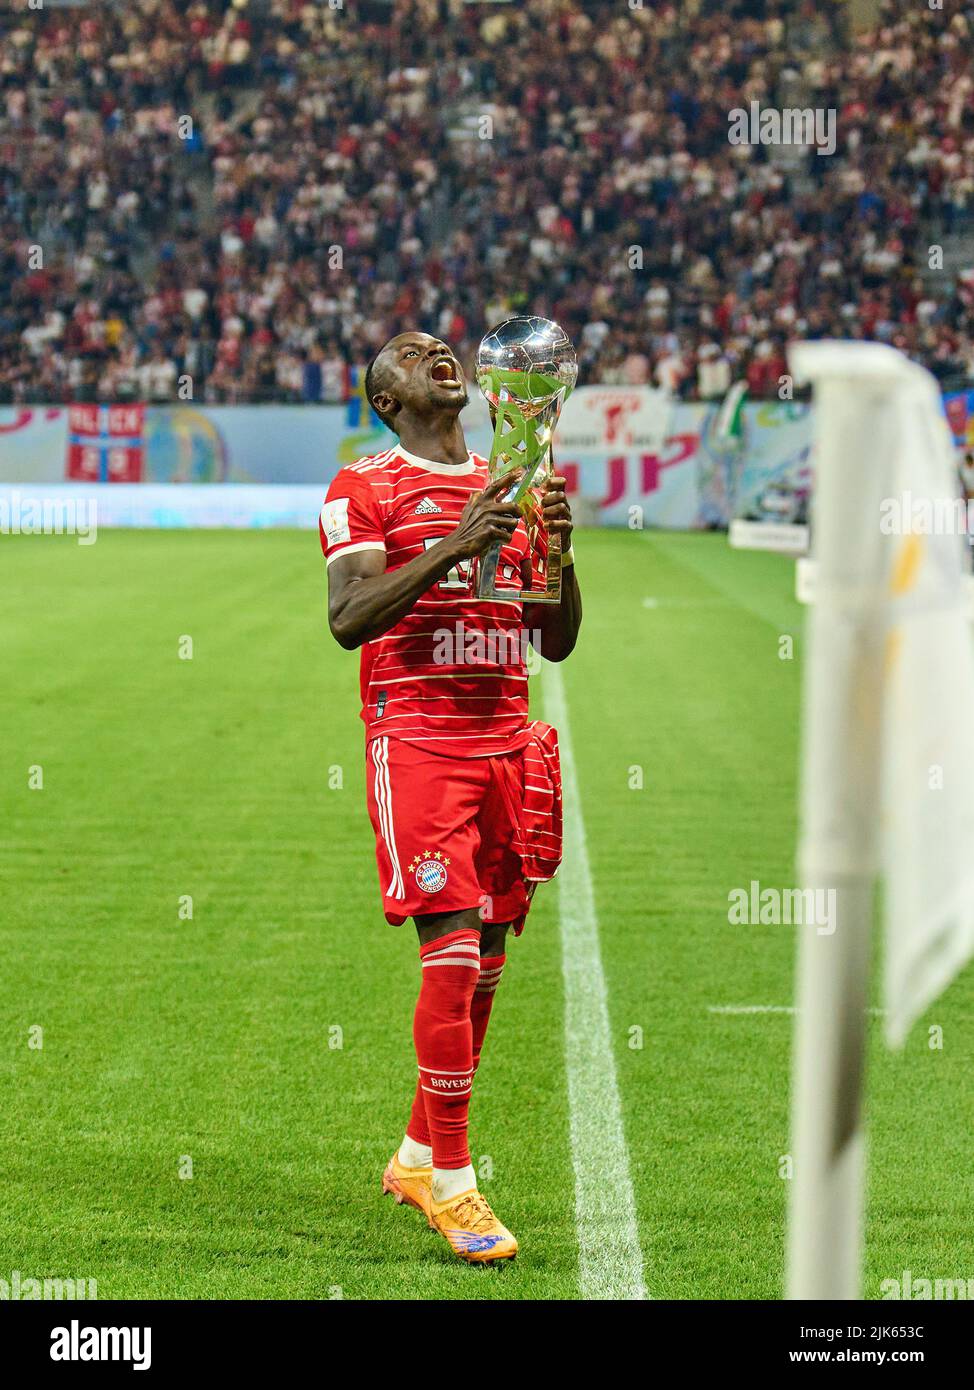 Leipzig, Germany. 30th July, 2022. Sadio Mane (FCB 17)     at winner ceremony with team mates after the match RB LEIPZIG - FC BAYERN MÜNCHEN 3-5 DFL SUPERCUP, 1. German Football League,  in Leipzig, July 30, 2022  Season 2022/2023 © Peter Schatz / Alamy Live News Credit: Peter Schatz/Alamy Live News Stock Photo